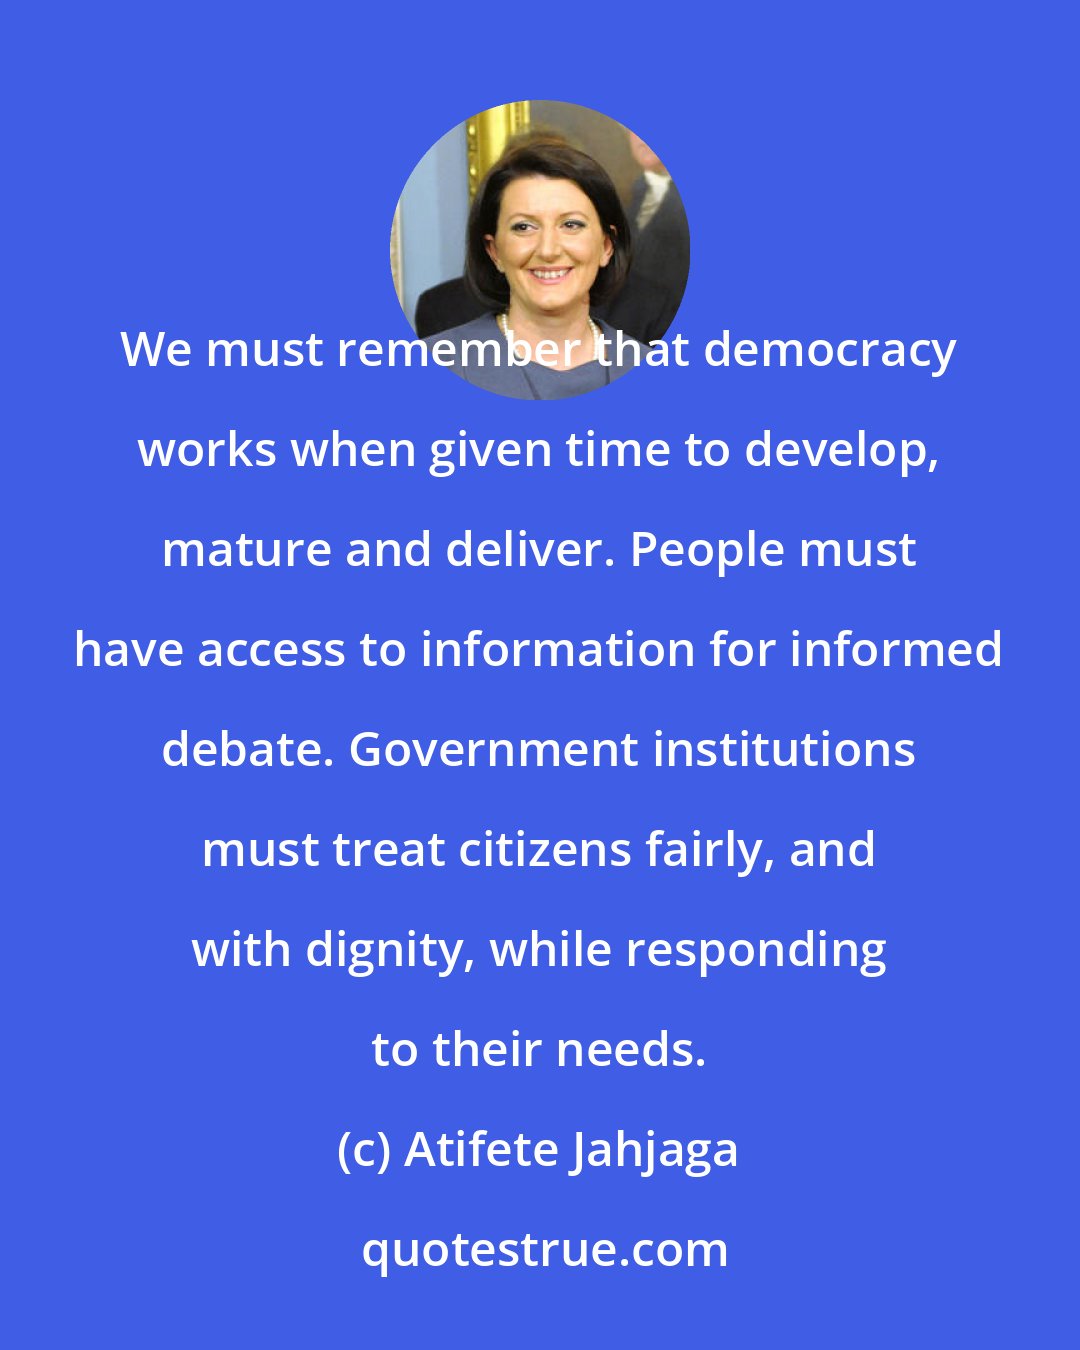 Atifete Jahjaga: We must remember that democracy works when given time to develop, mature and deliver. People must have access to information for informed debate. Government institutions must treat citizens fairly, and with dignity, while responding to their needs.